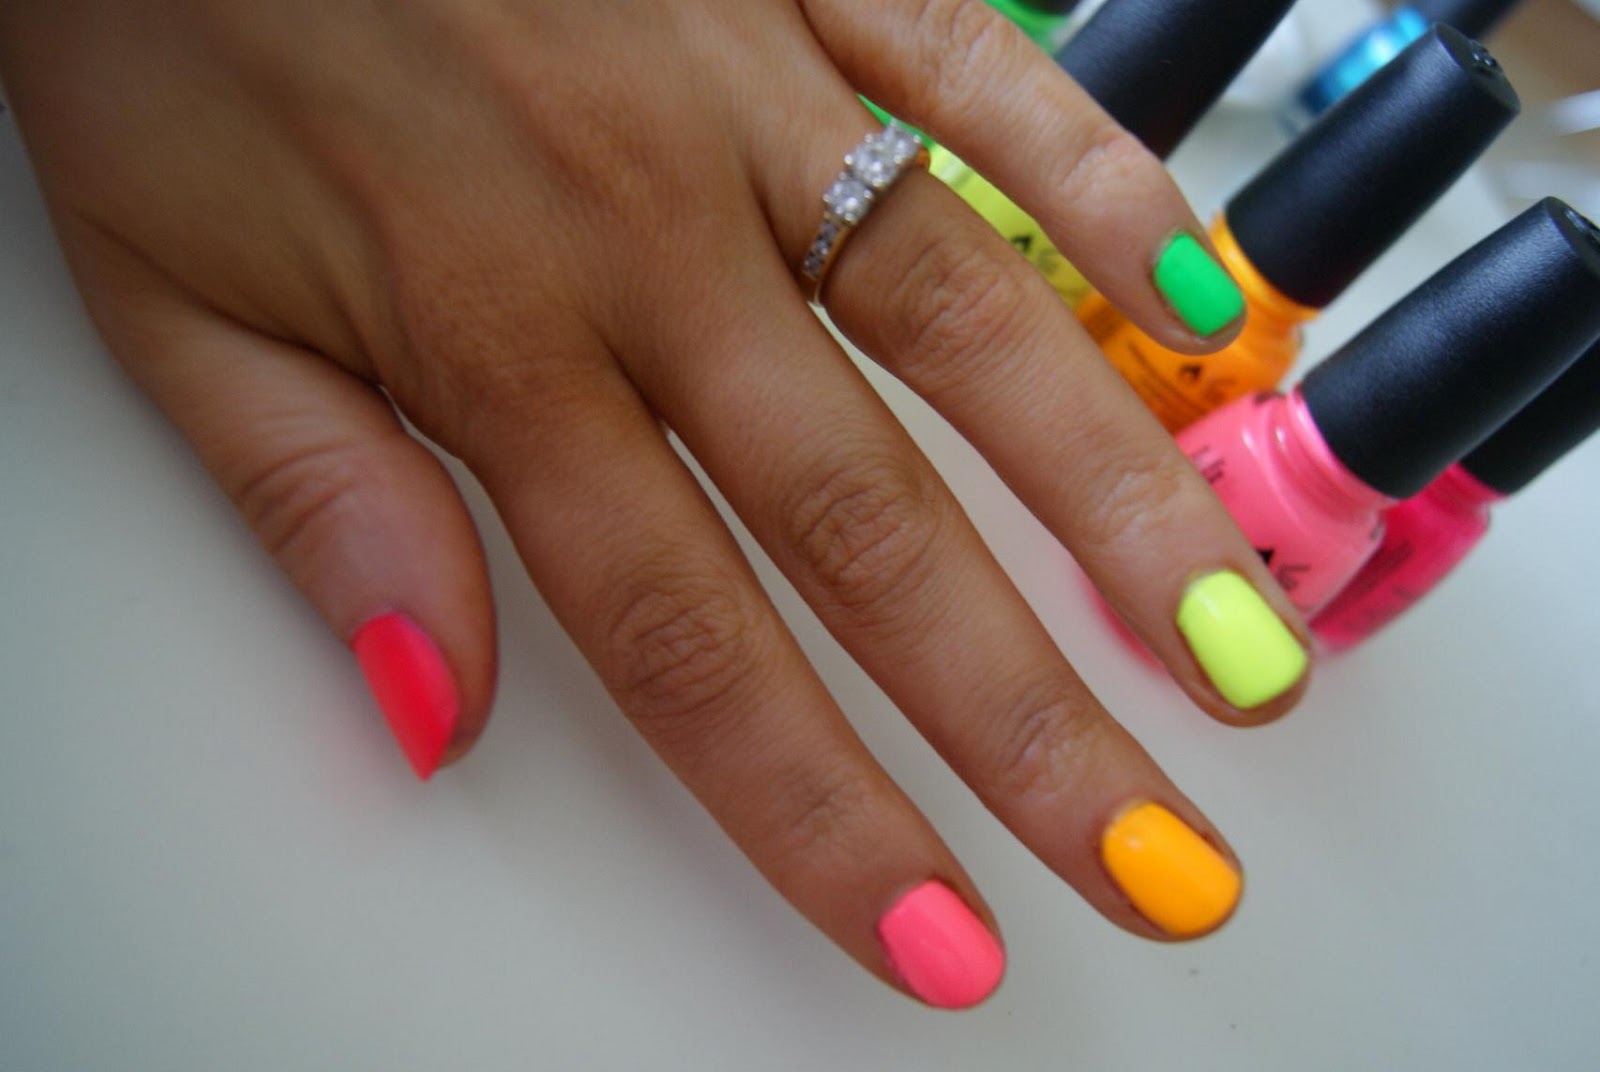 5. Neon Summer Nail Designs for a Pop of Color - wide 11